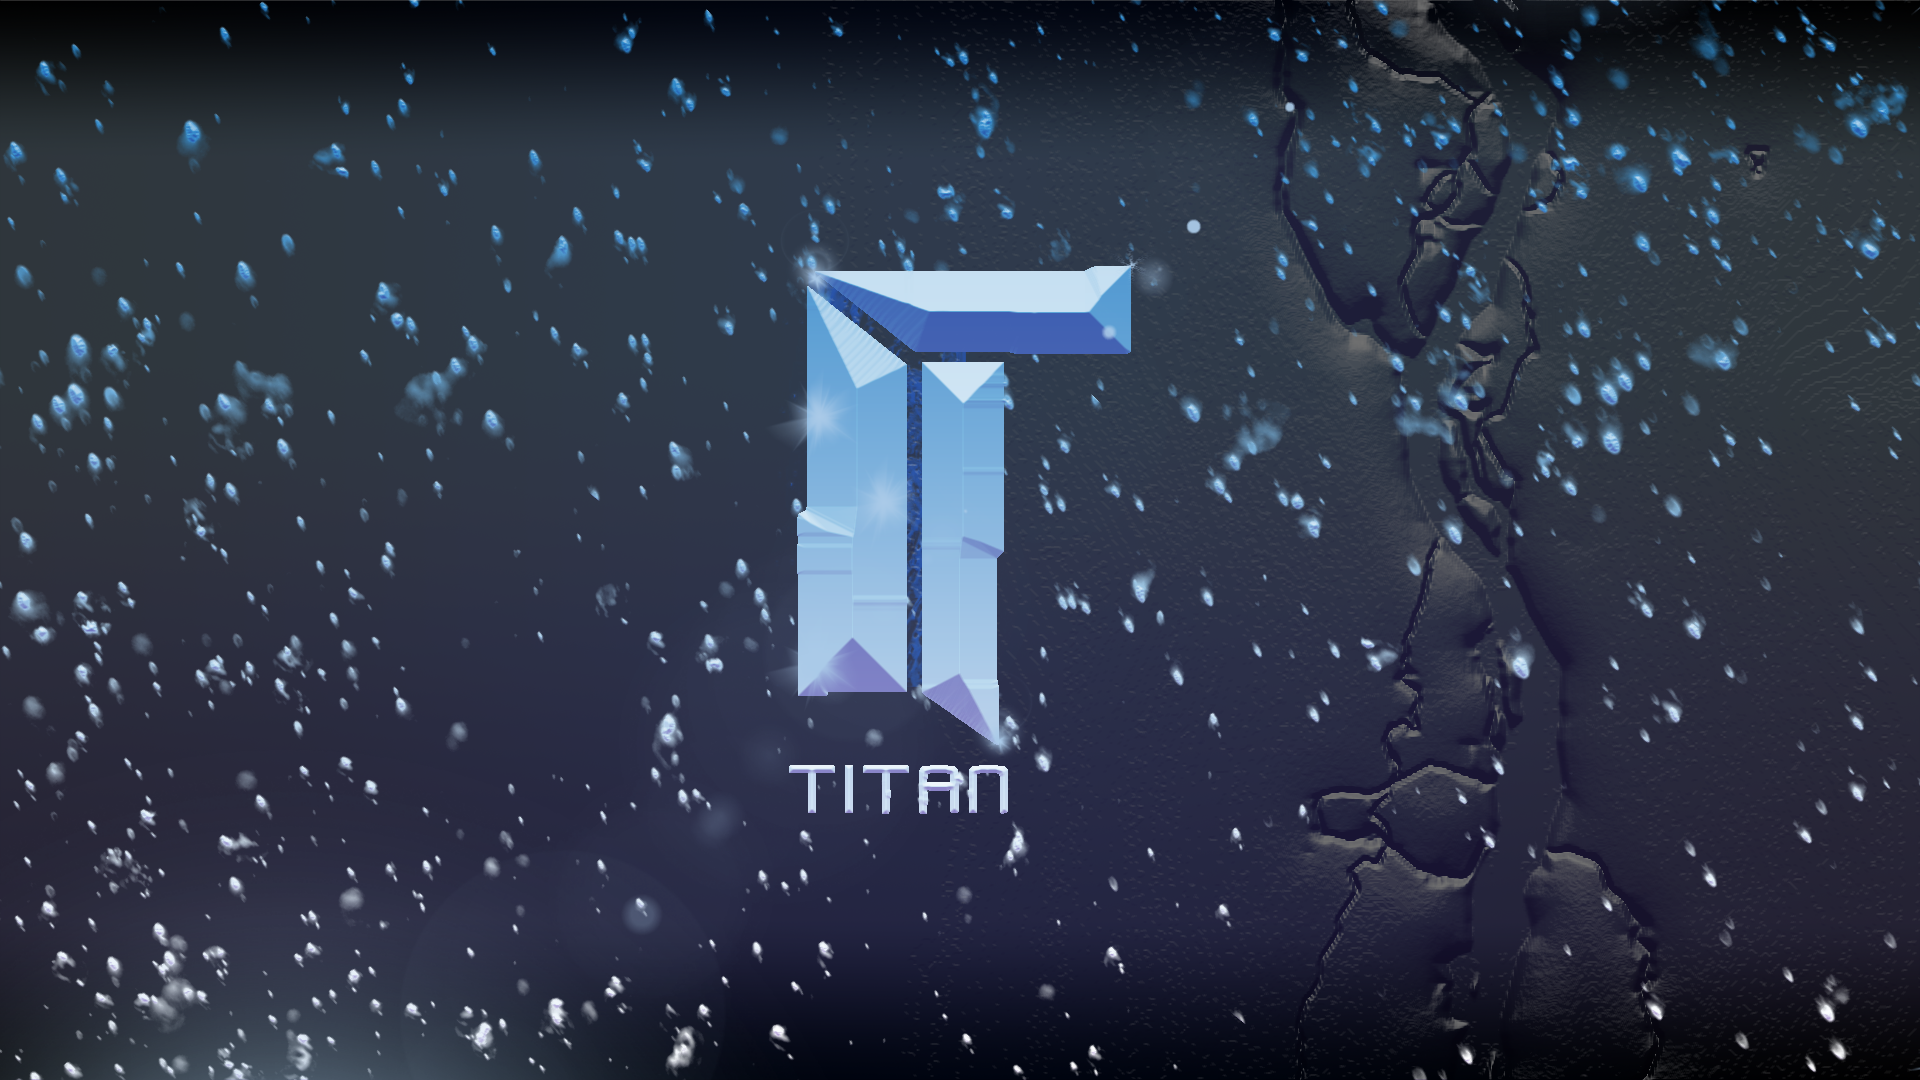 A Titan Wallpaper I Made When Was Still New To Photoshop Games